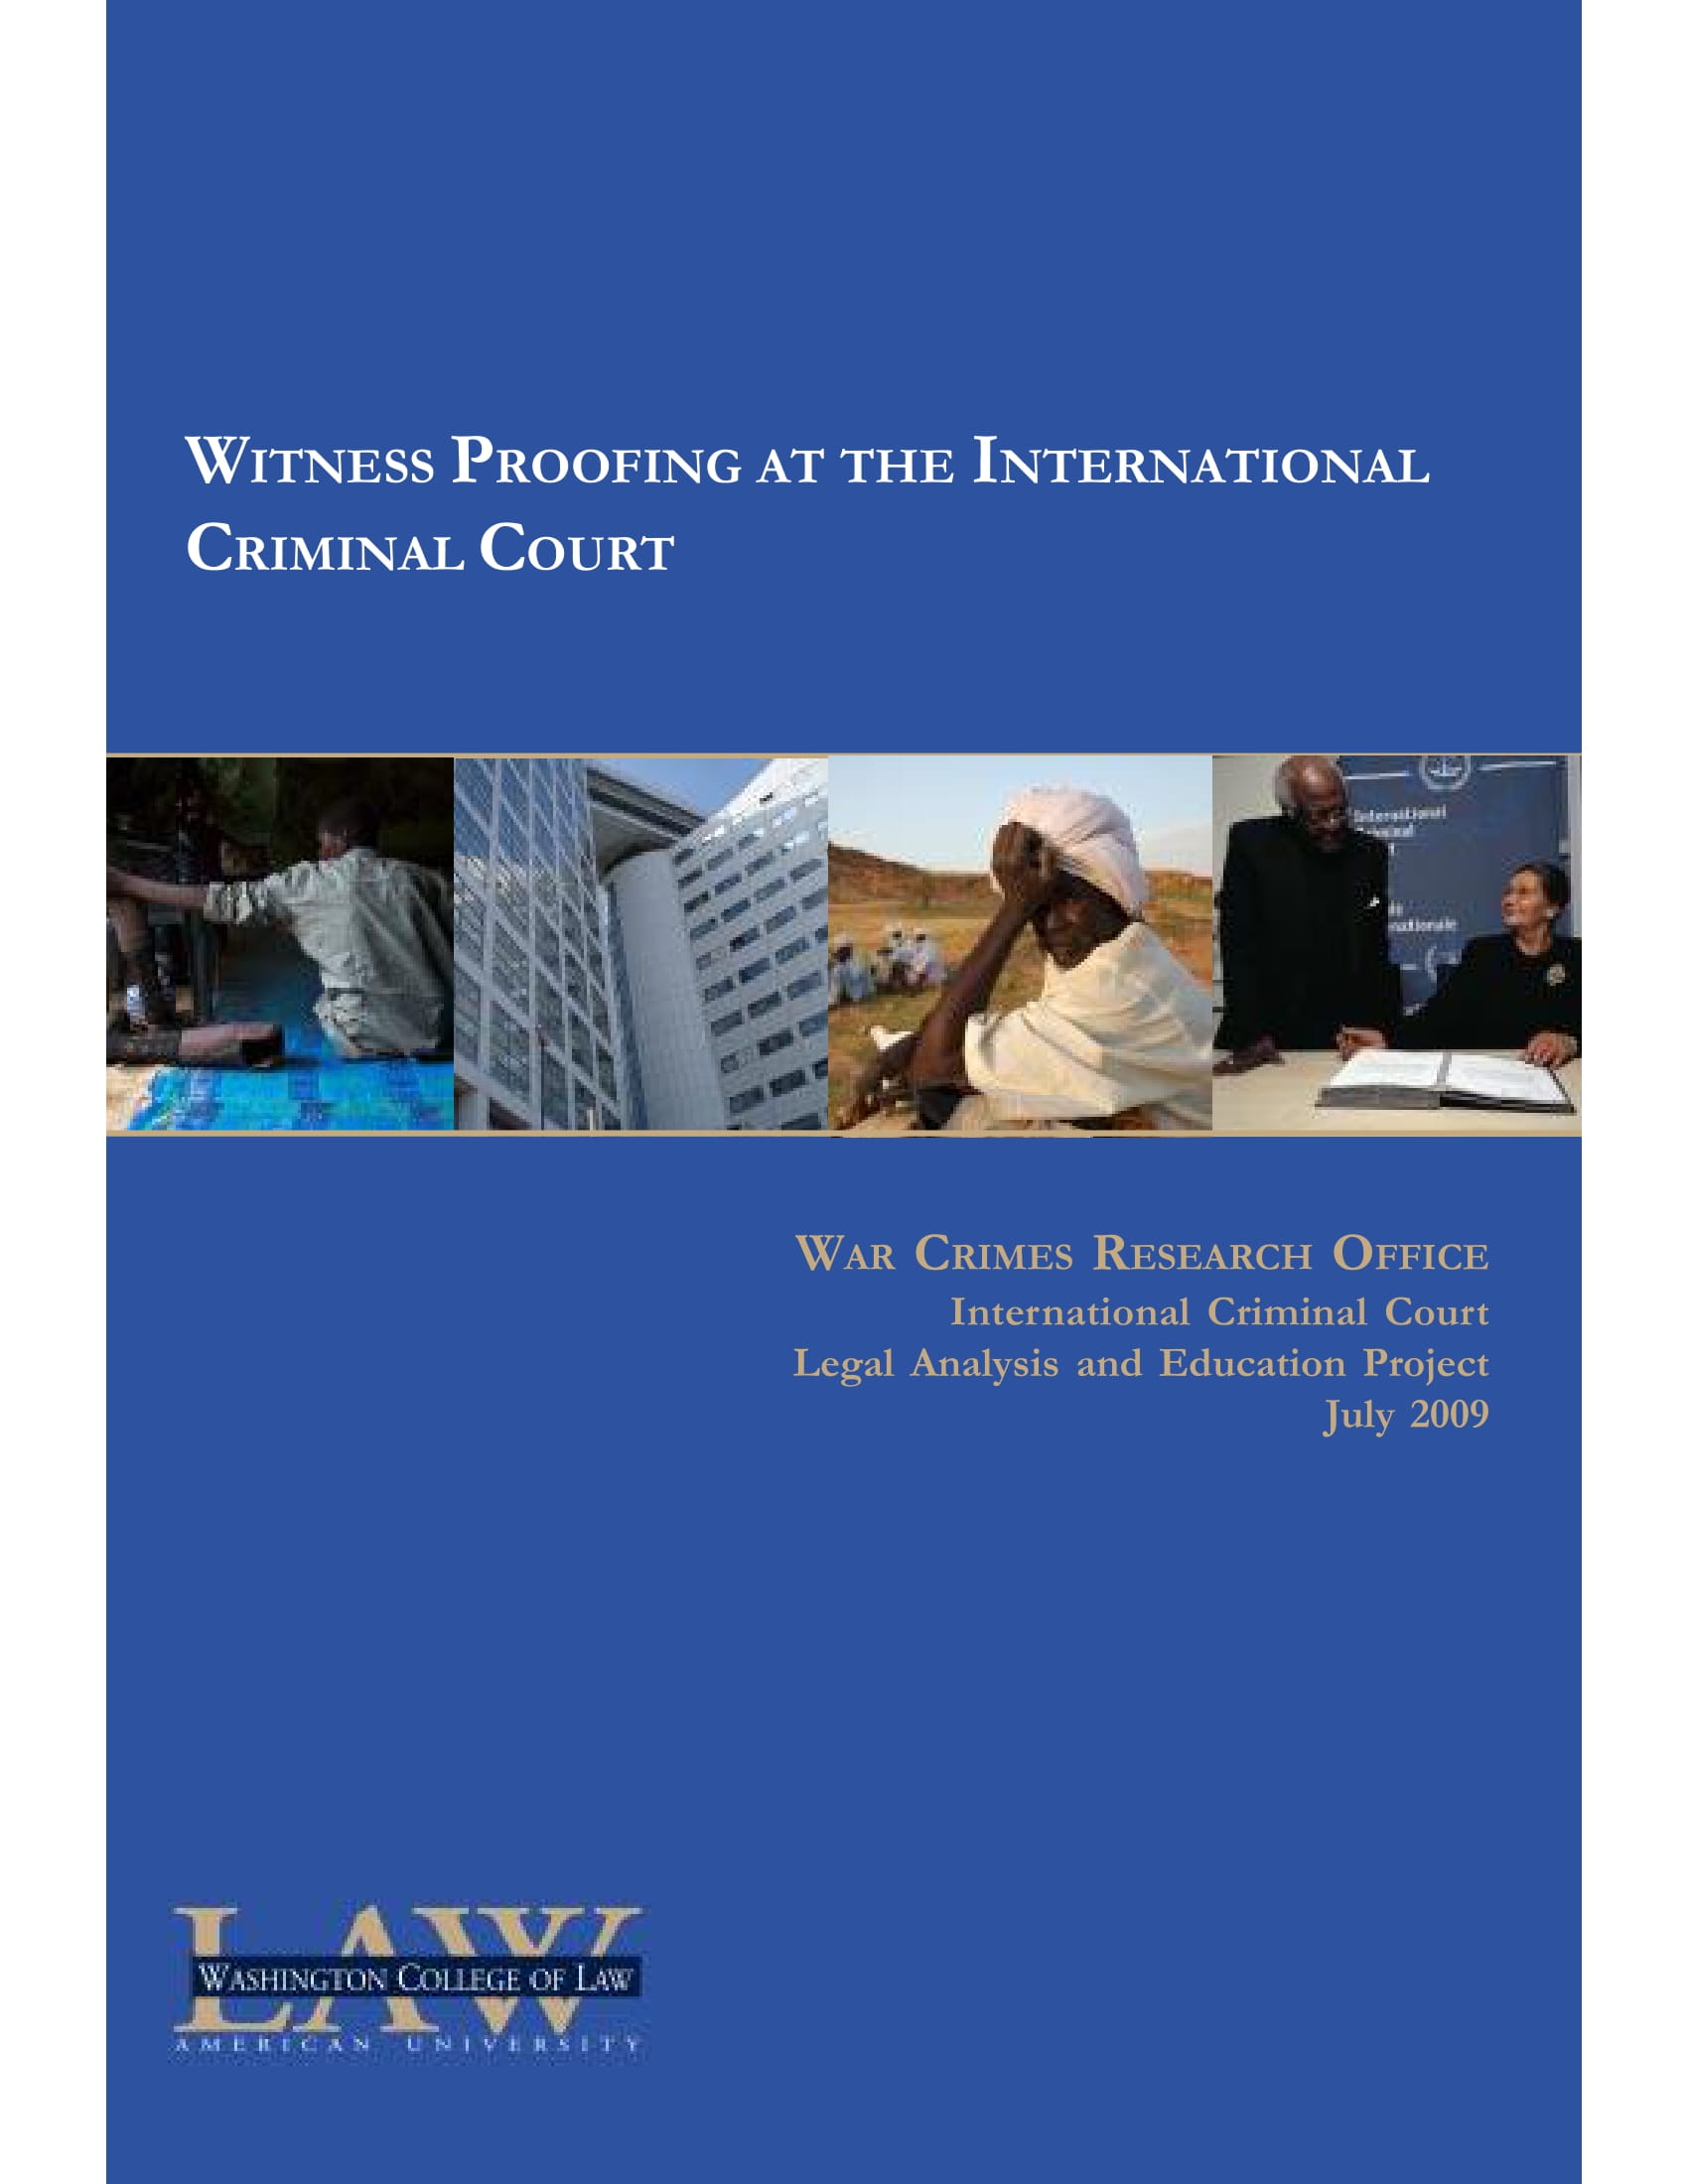 Report 7: Witness Proofing at the International Criminal Court